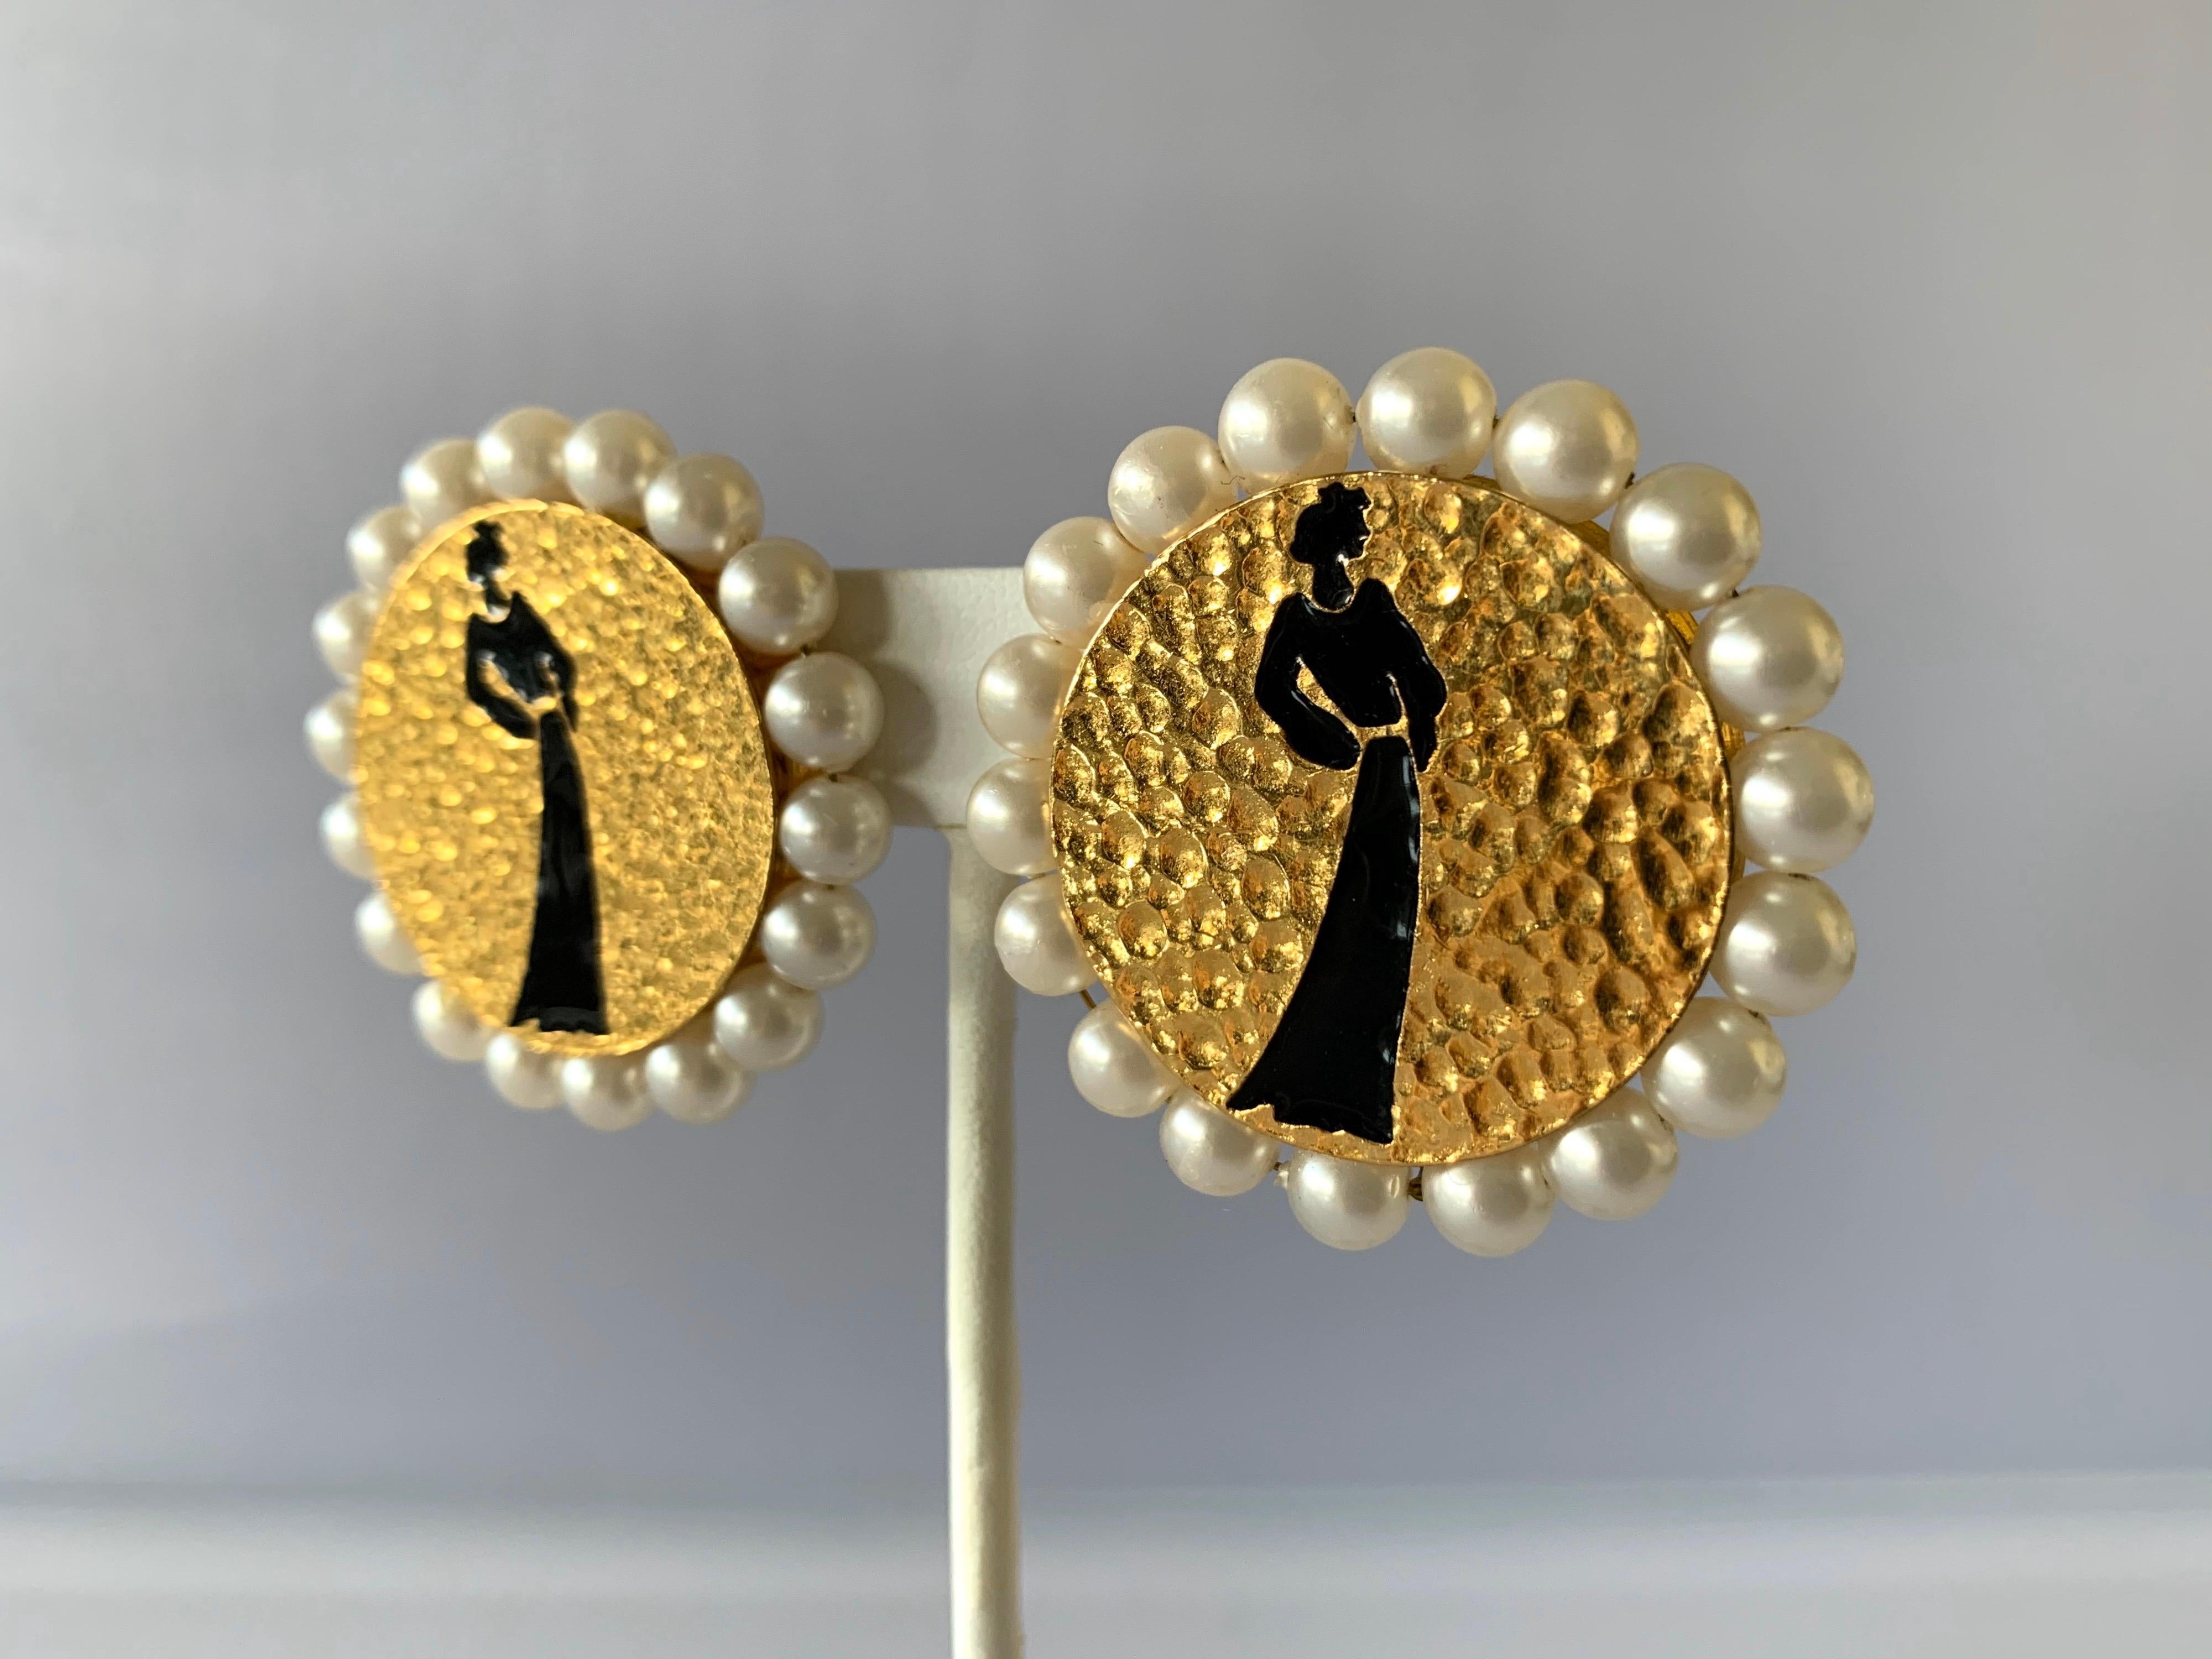 Scarce Chanel vintage clip-on earrings - comprised of gilt metal the circular earrings feature a black silhouette of Mademoiselle Chanel with classic Chanel pearls around the earrings (stamped Chanel, made in France) on the back.